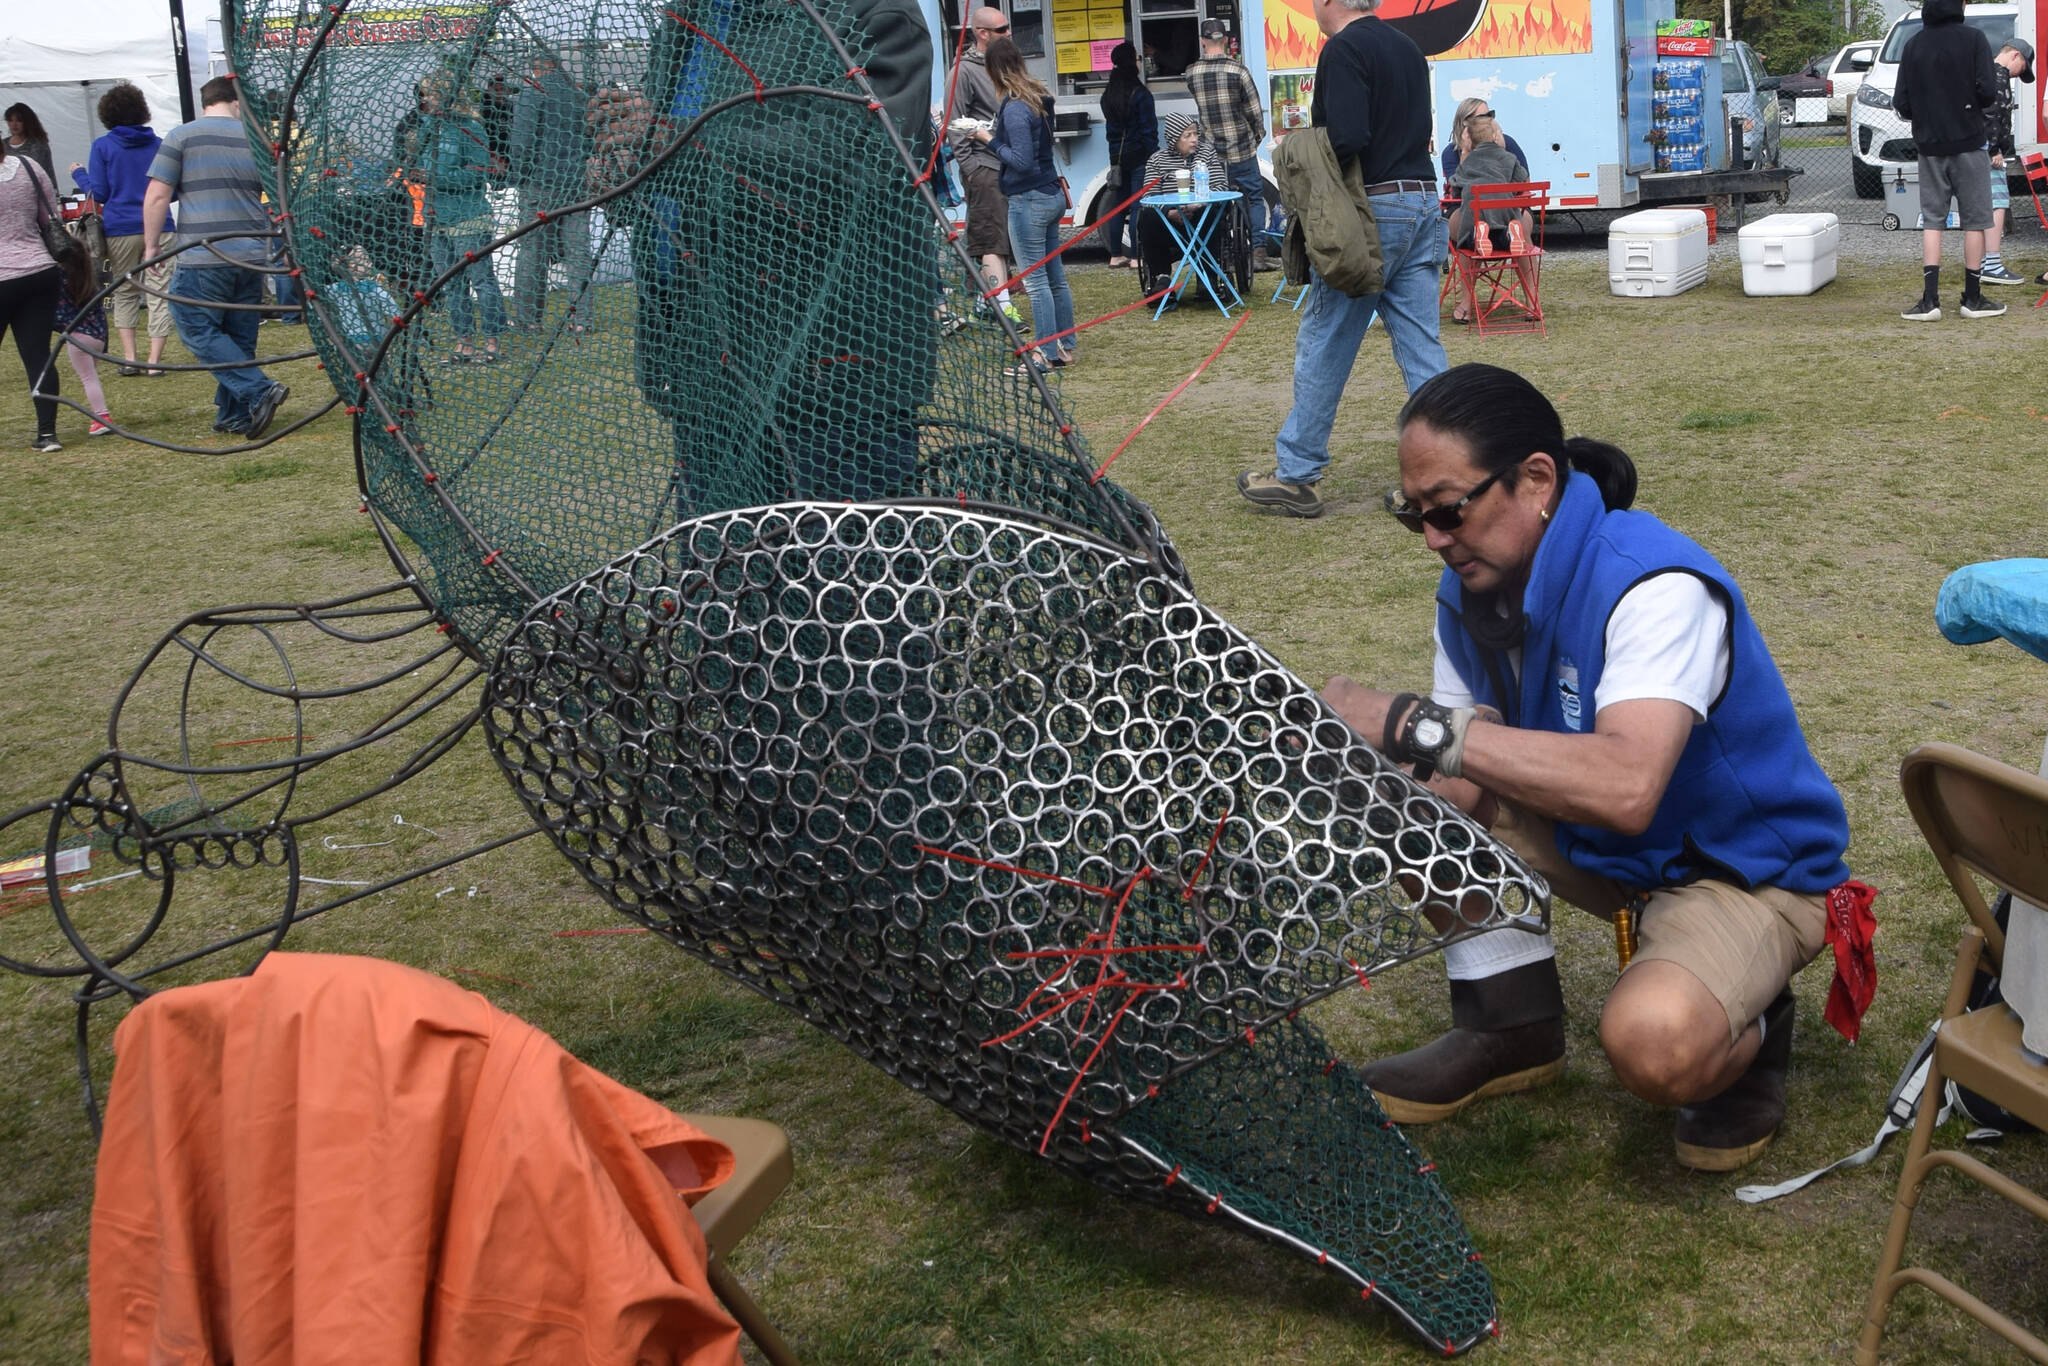 Cam Choy, associate professor of art at Kenai Peninsula College, works on a salmon sculpture in collaboration with the Kenai Watershed Forum during the Kenai River Festival at Soldotna Creek Park in Soldotna, Alaska, on June 8, 2019. (Photo by Brian Mazurek/Peninsula Clarion file)